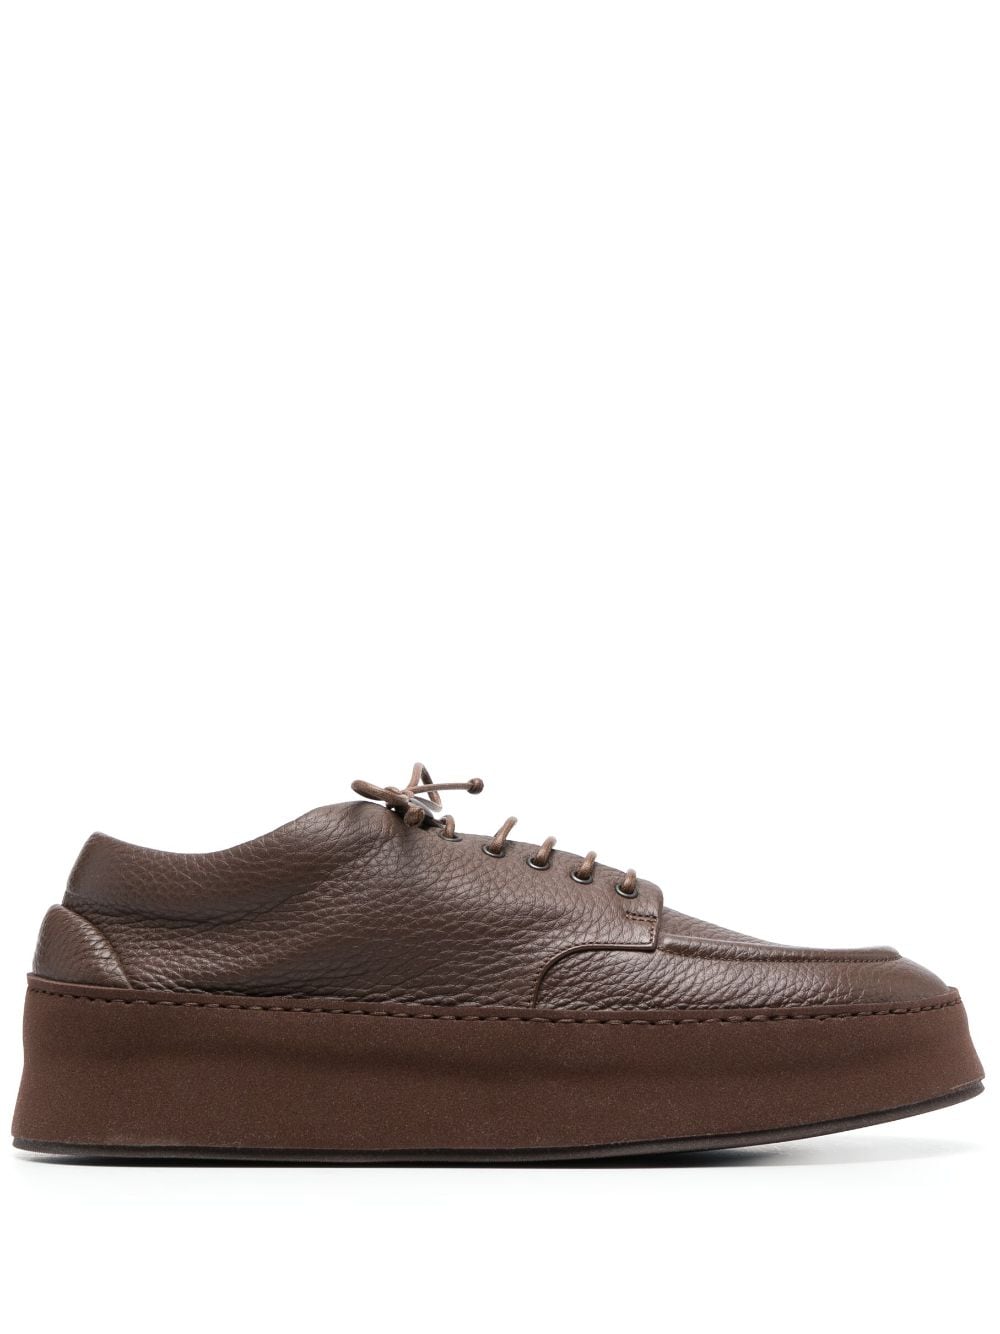 Marsèll lace-up leather derby shoes - Brown von Marsèll